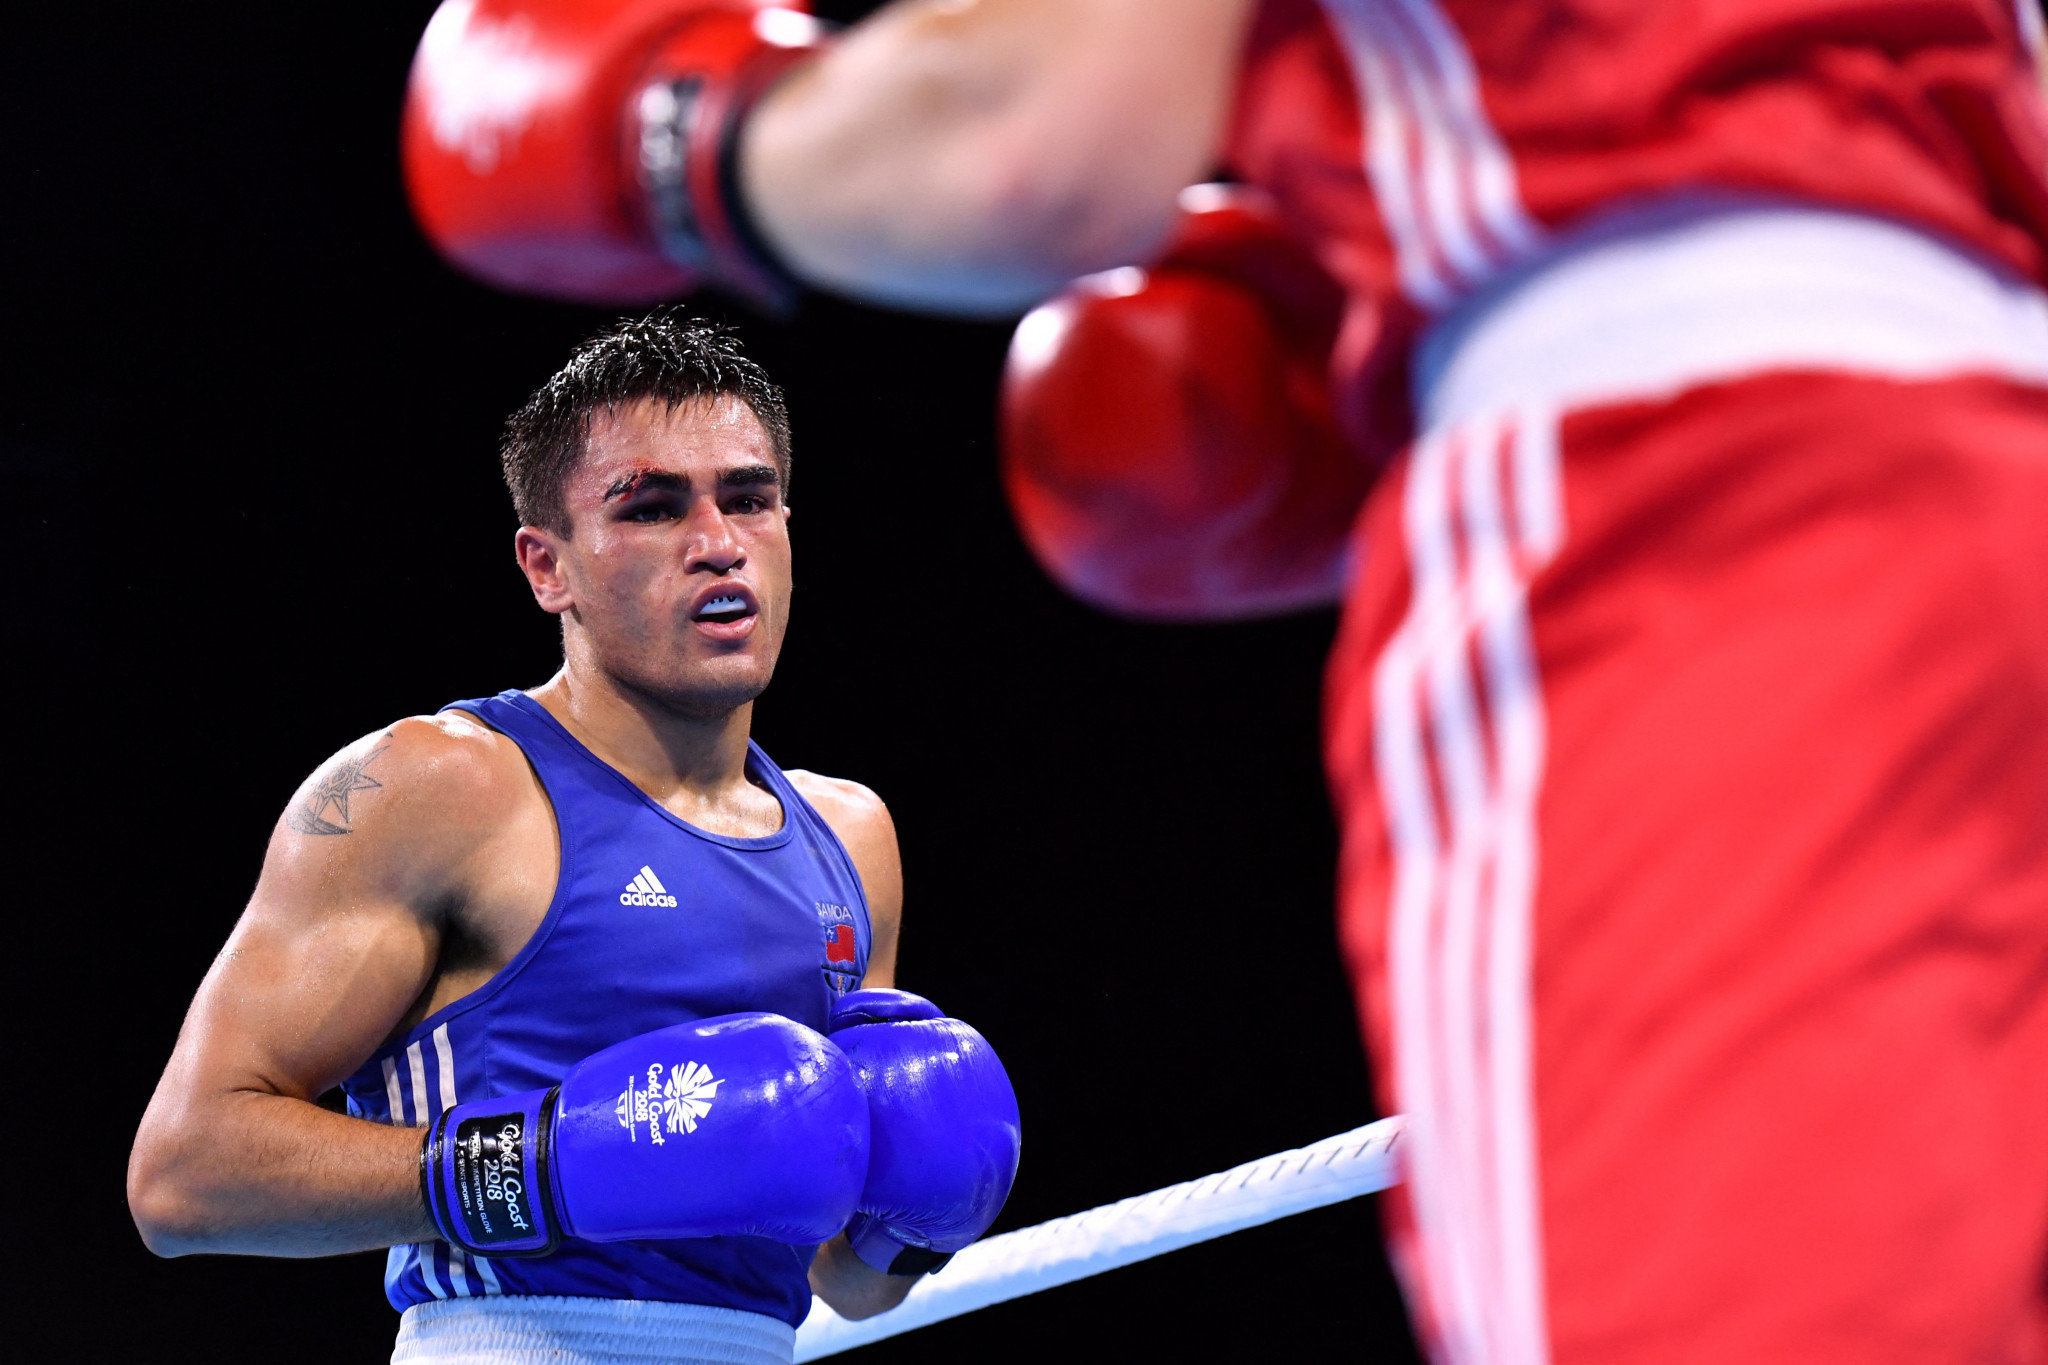 Boxer Ato Plodzicki-Faoagali will be back in Birmingham after a silver in Gold Coast ©Getty Images